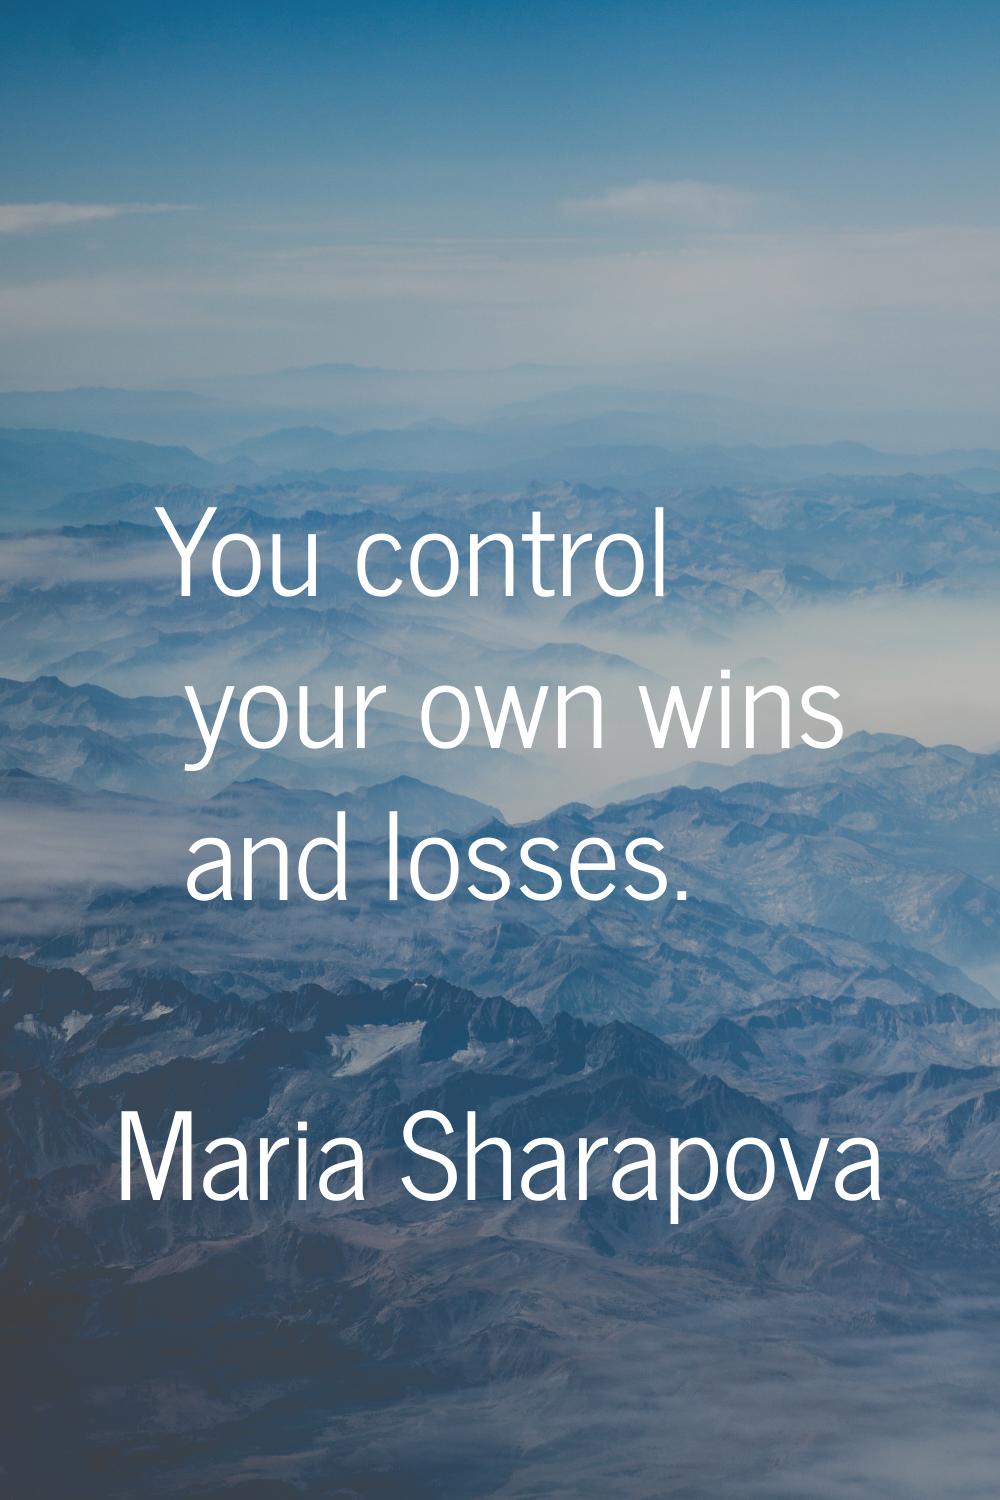 You control your own wins and losses.